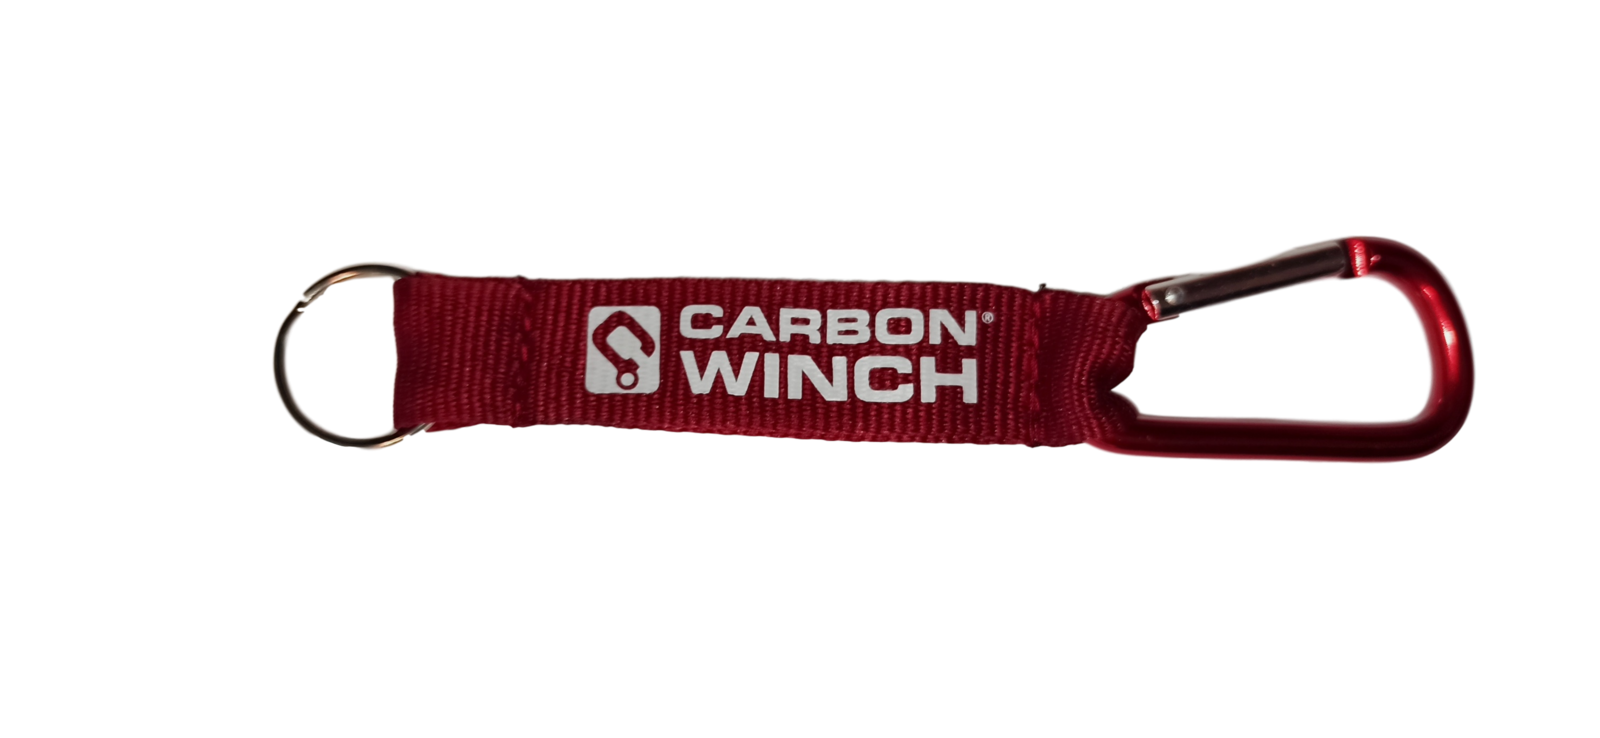 Carbon Winch Keyring or wireless remote lanyard